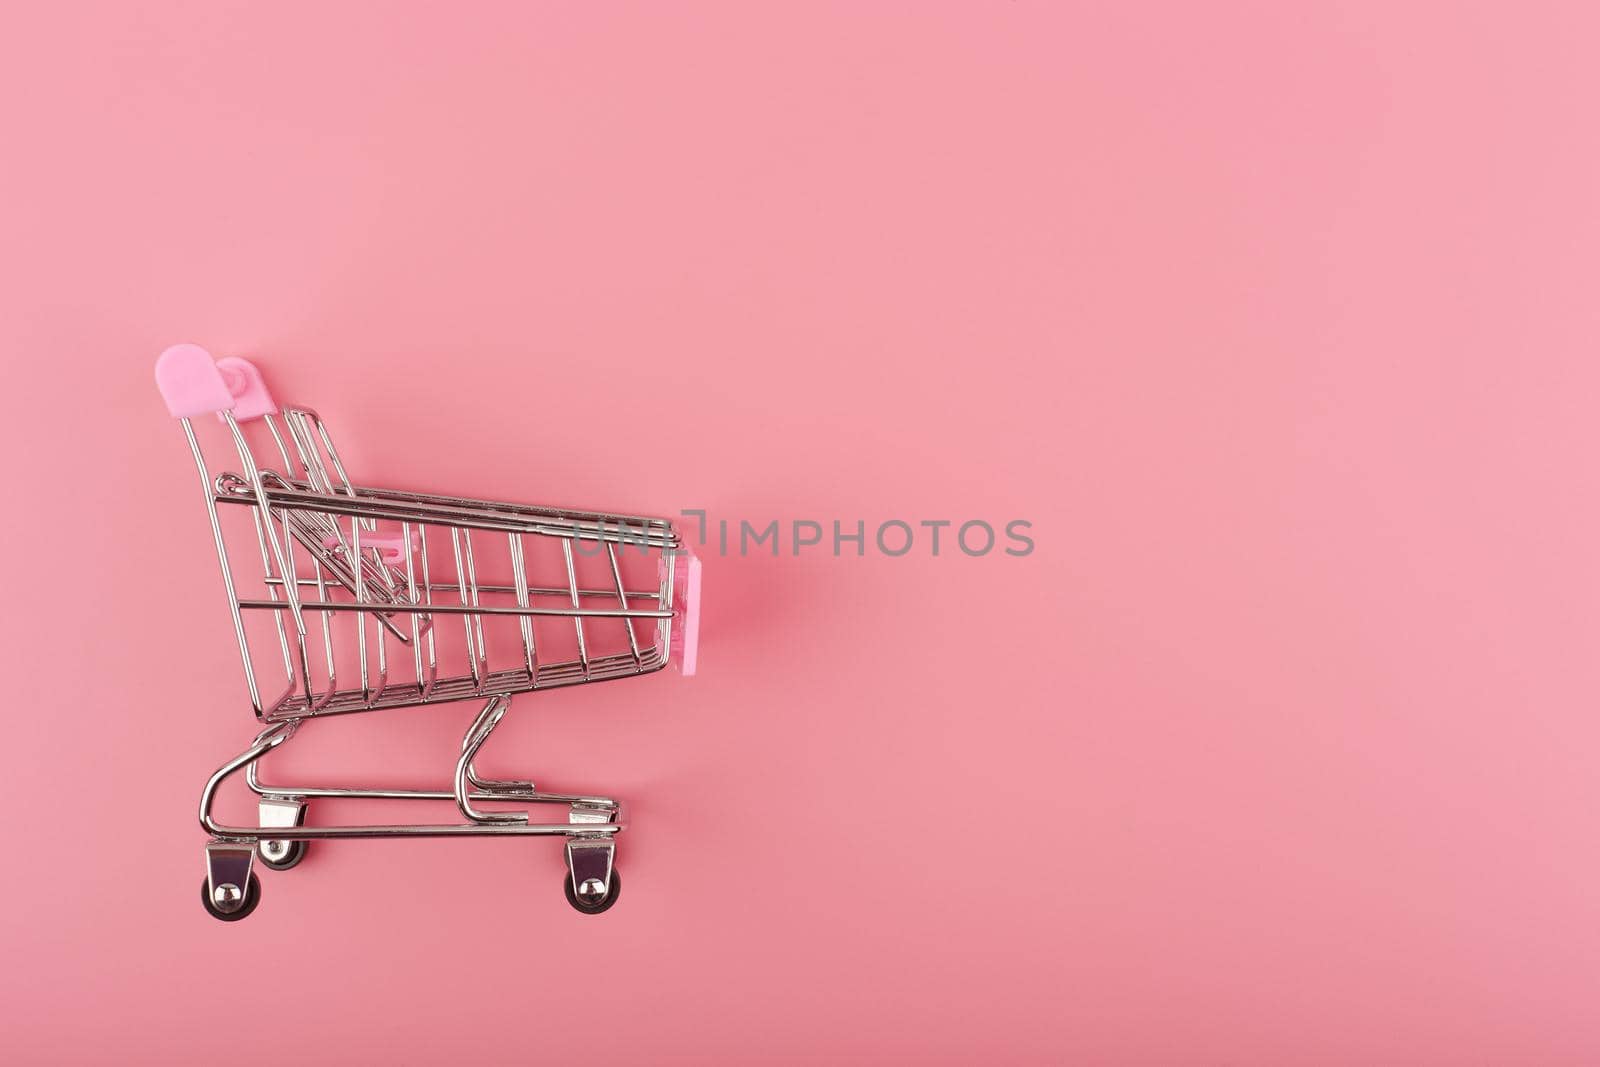 Creative flat lay with top view of toy shopping cart on pink background with copy space. Concept of online retail, sales and shopping. Template for commercial or advertisement